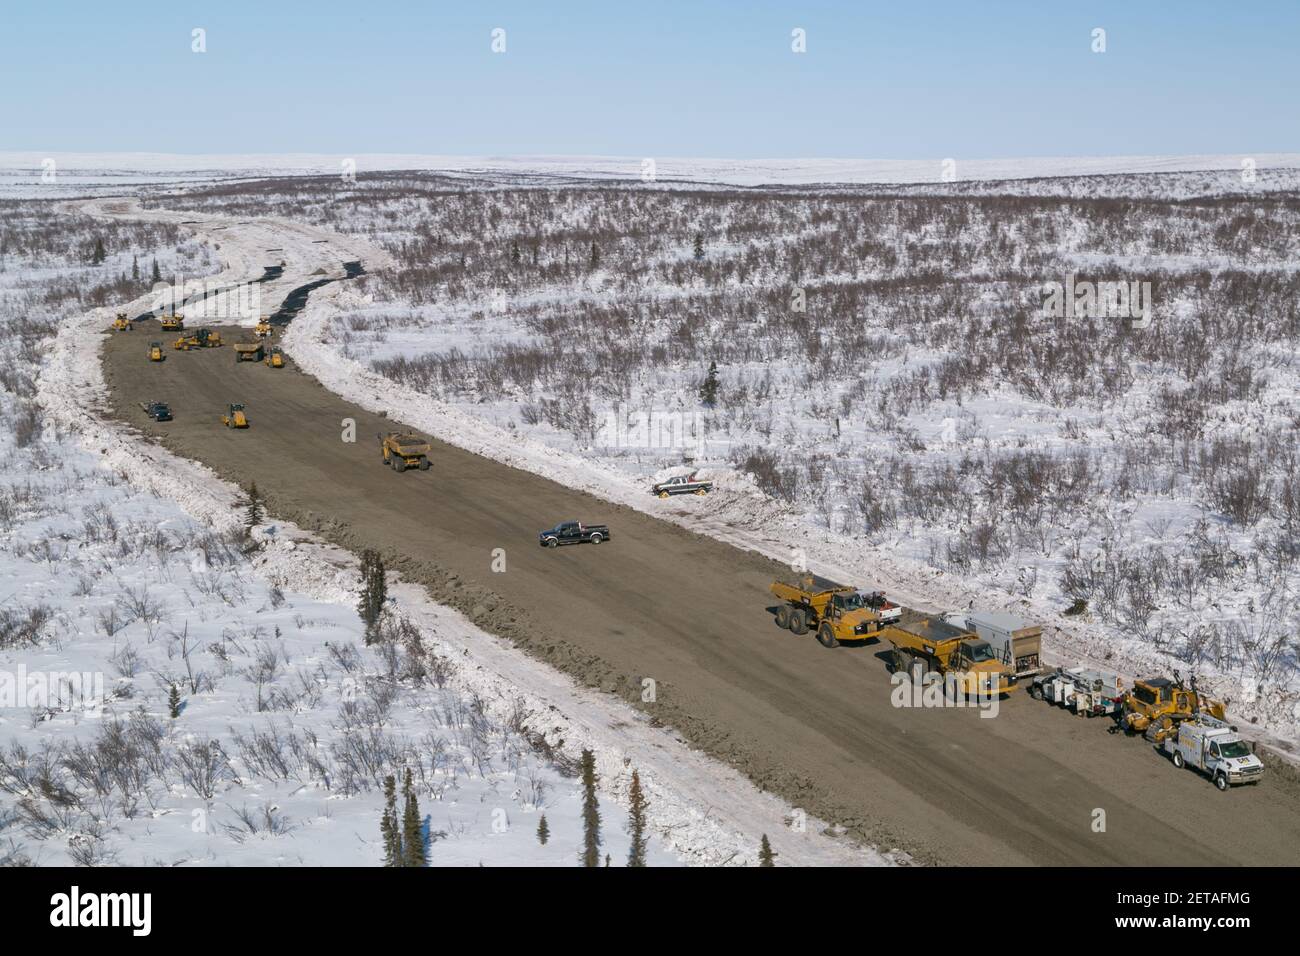 Laying down geotextile fabric (protects permafrost) and spreading gravel on the Inuvik-Tuktoyaktuk Highway, Northwest Territories, Canada's Arctic. Stock Photo